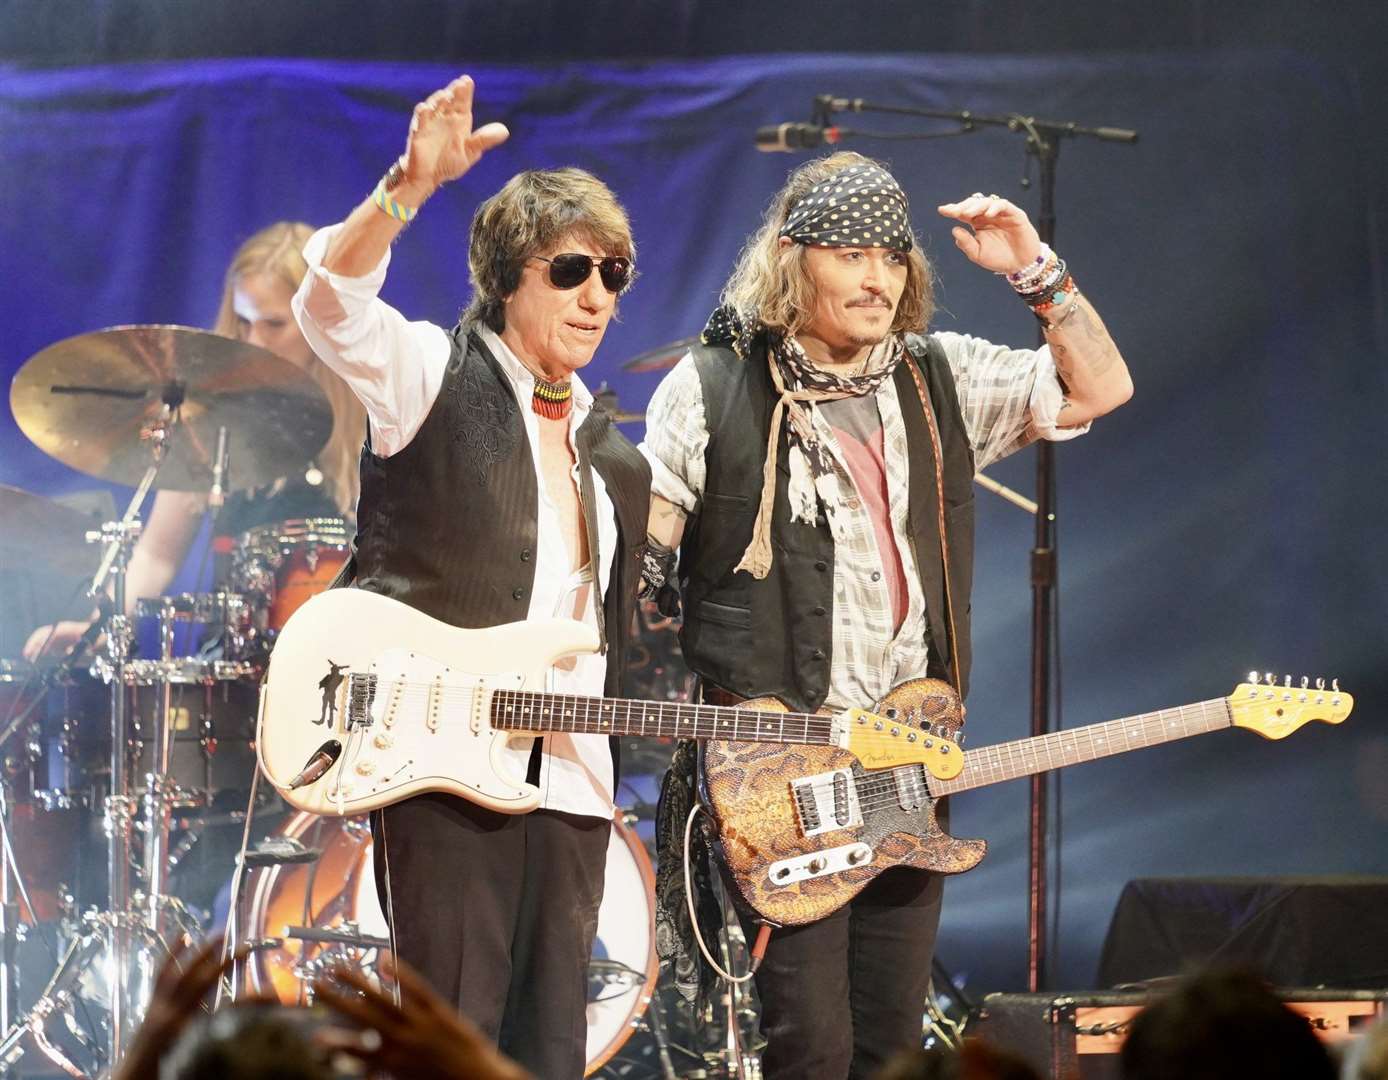 Johnny Depp at the Royal Albert Hall, London, appearing alongside Jeff Beck last year (Raph Pour-Hashemi/PA)